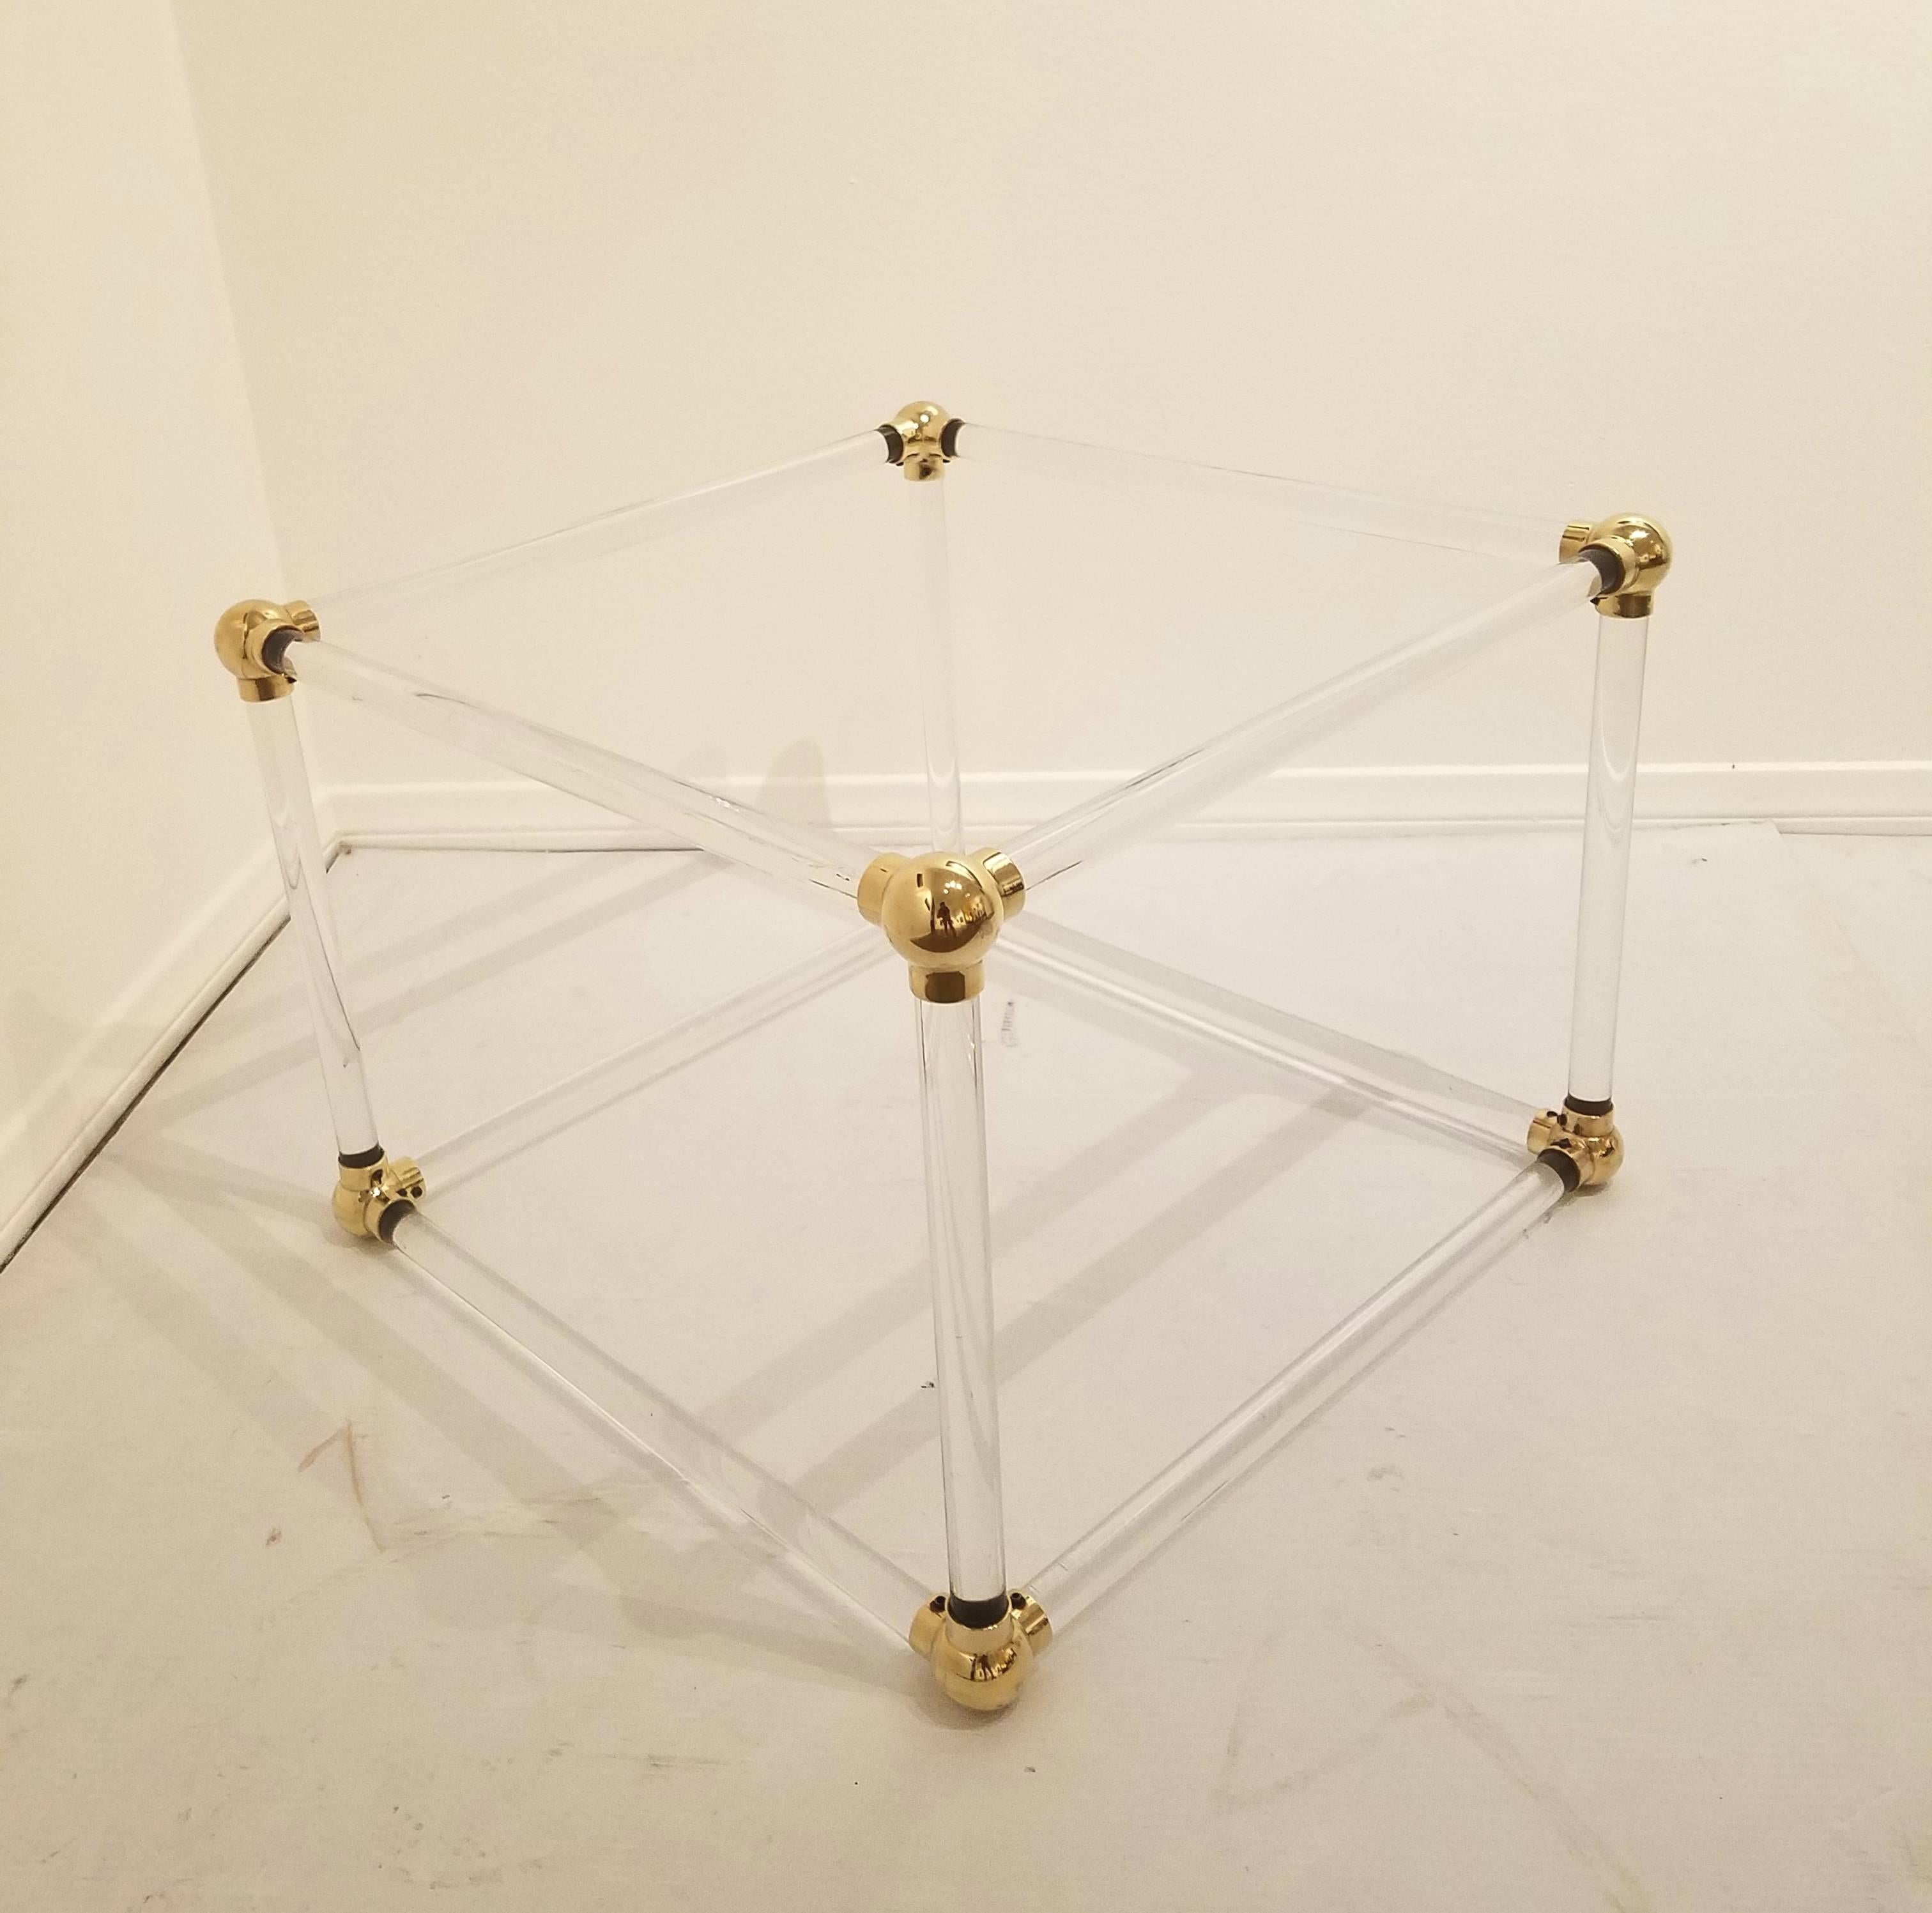 Unique Mid-Century Lucite cube and brass connector coffee table base, circa 1970s. The tubular Lucite poles and brass connectors have been freshly polished and it makes a very unique and stunning piece. It can be used as a coffee table with a square